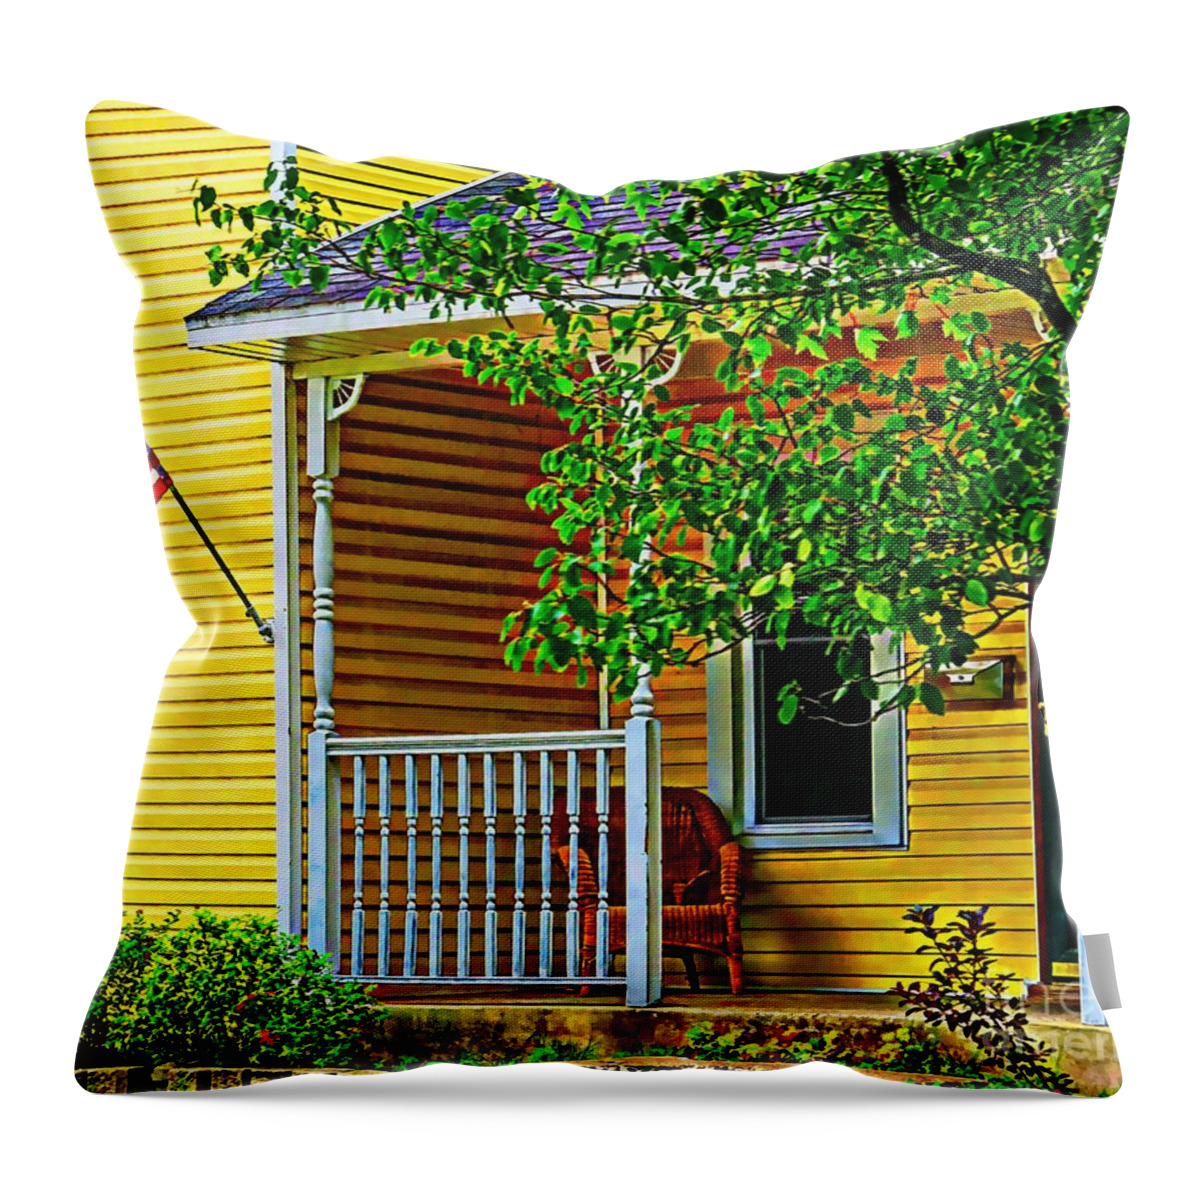 Porch Throw Pillow featuring the painting American Porch in Yellow by Desiree Paquette